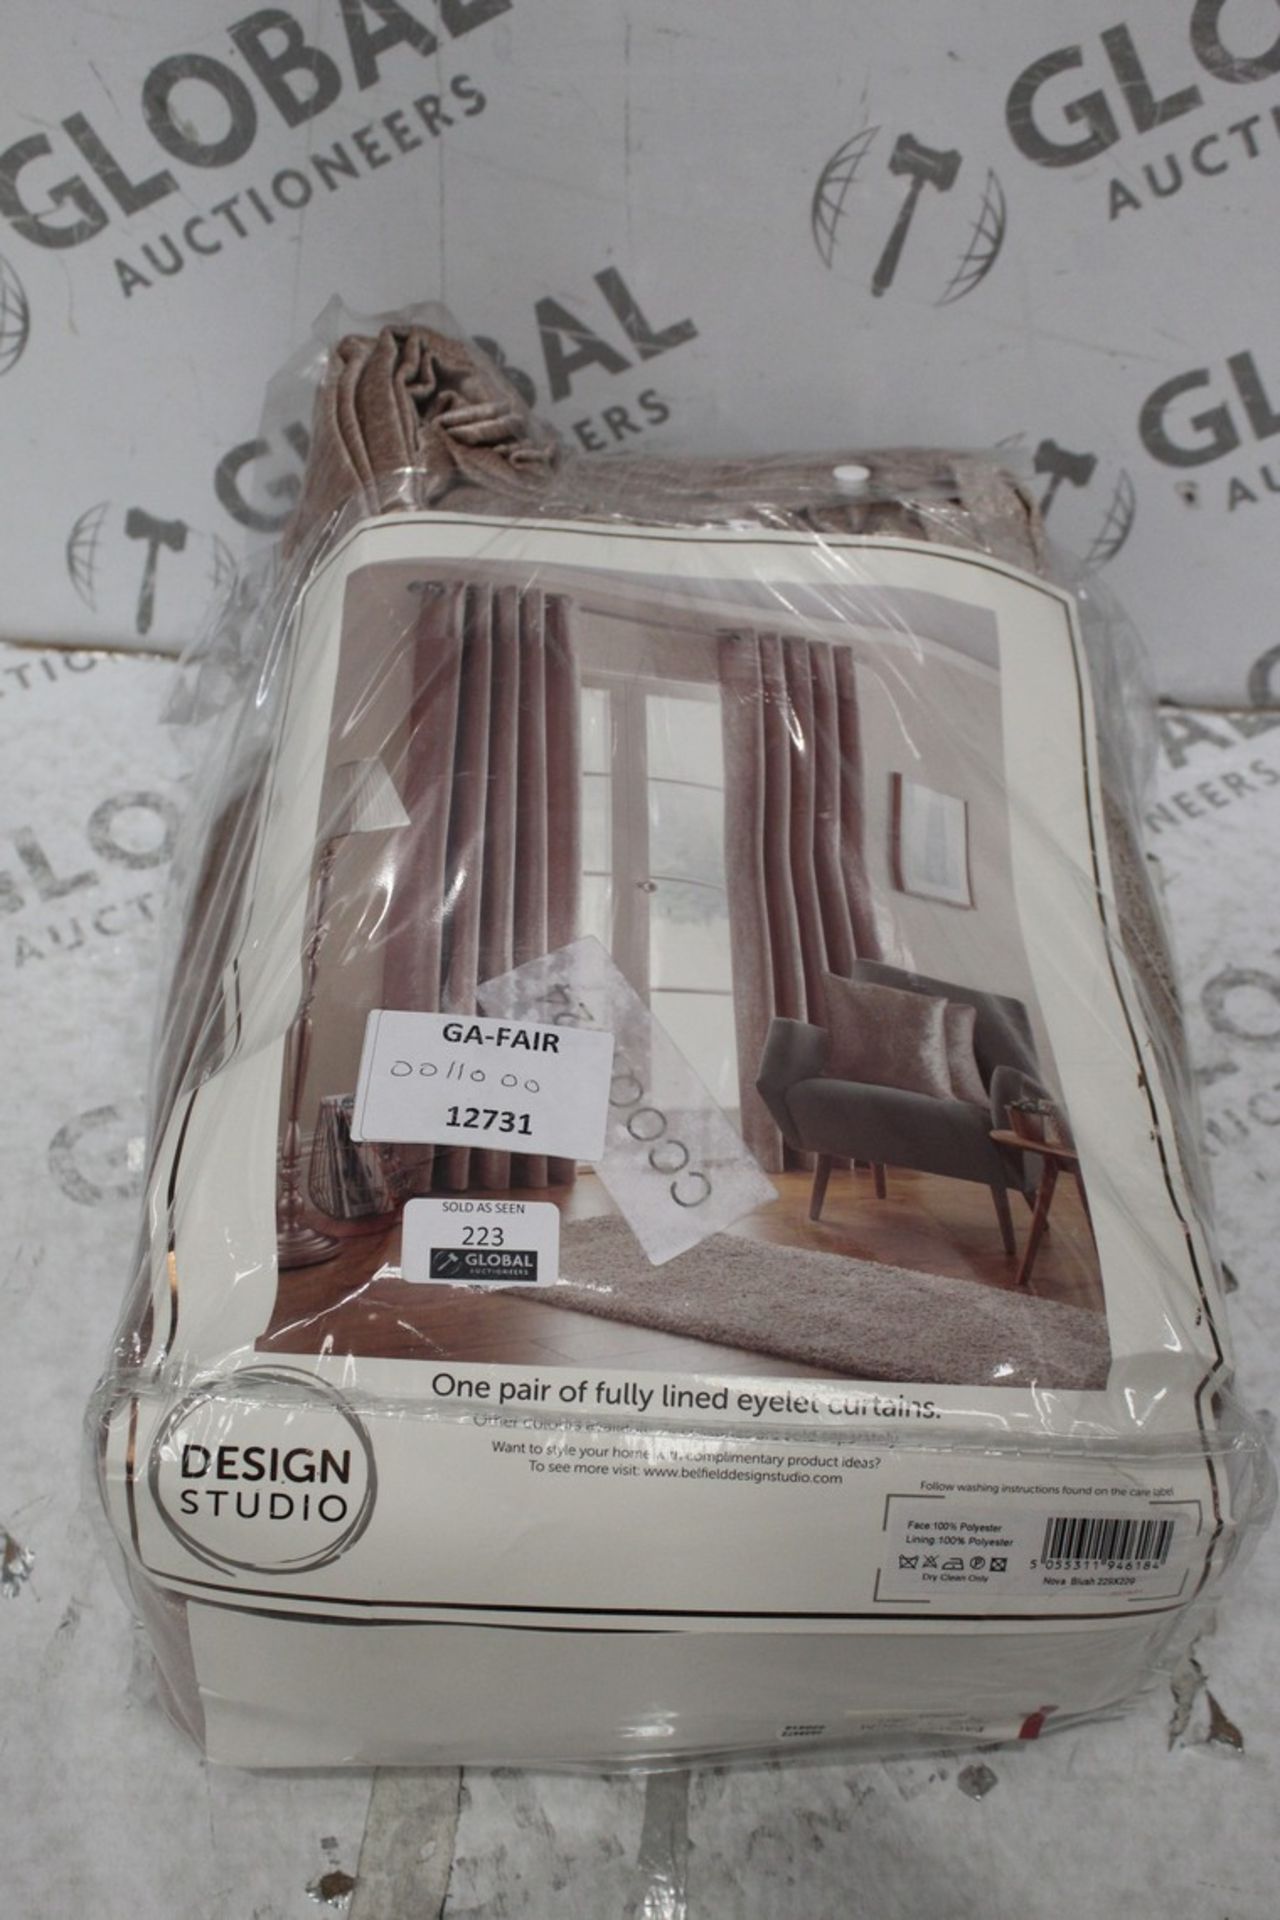 Bagged Pair Of Design Studio Eyelet Headed Curtains RRP £110 (12731) (Pictures Are For